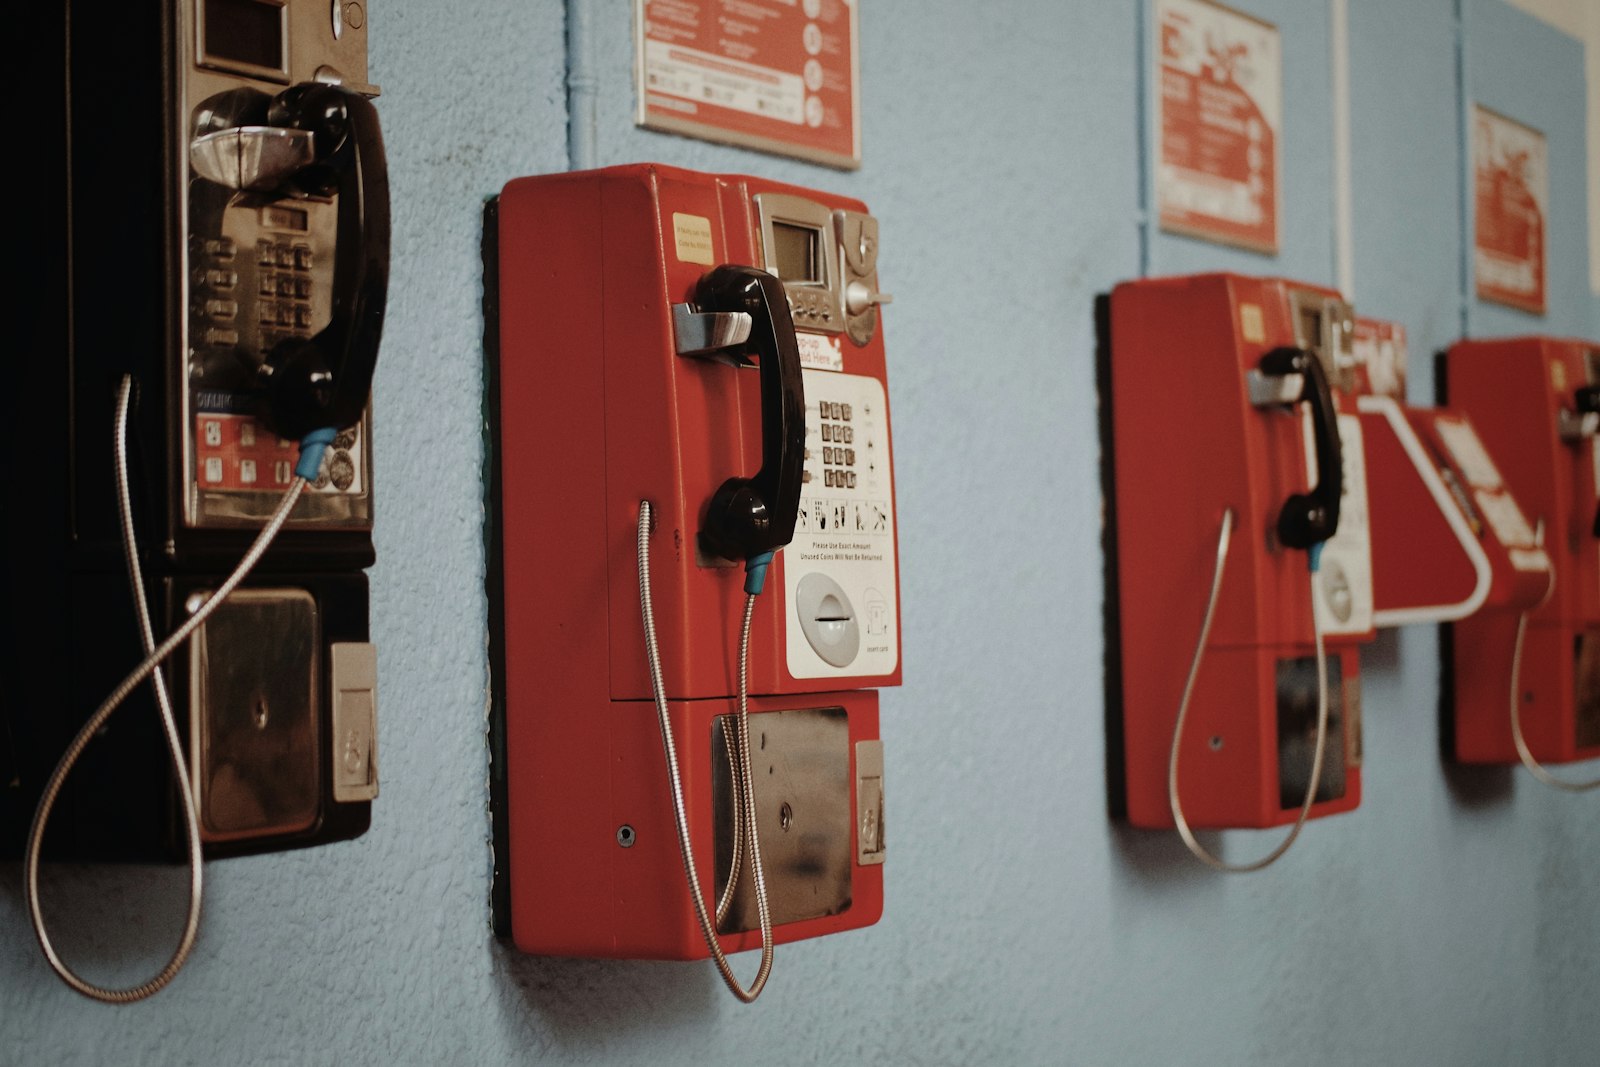 Samsung NX3000 sample photo. Four wall mounted telephones photography